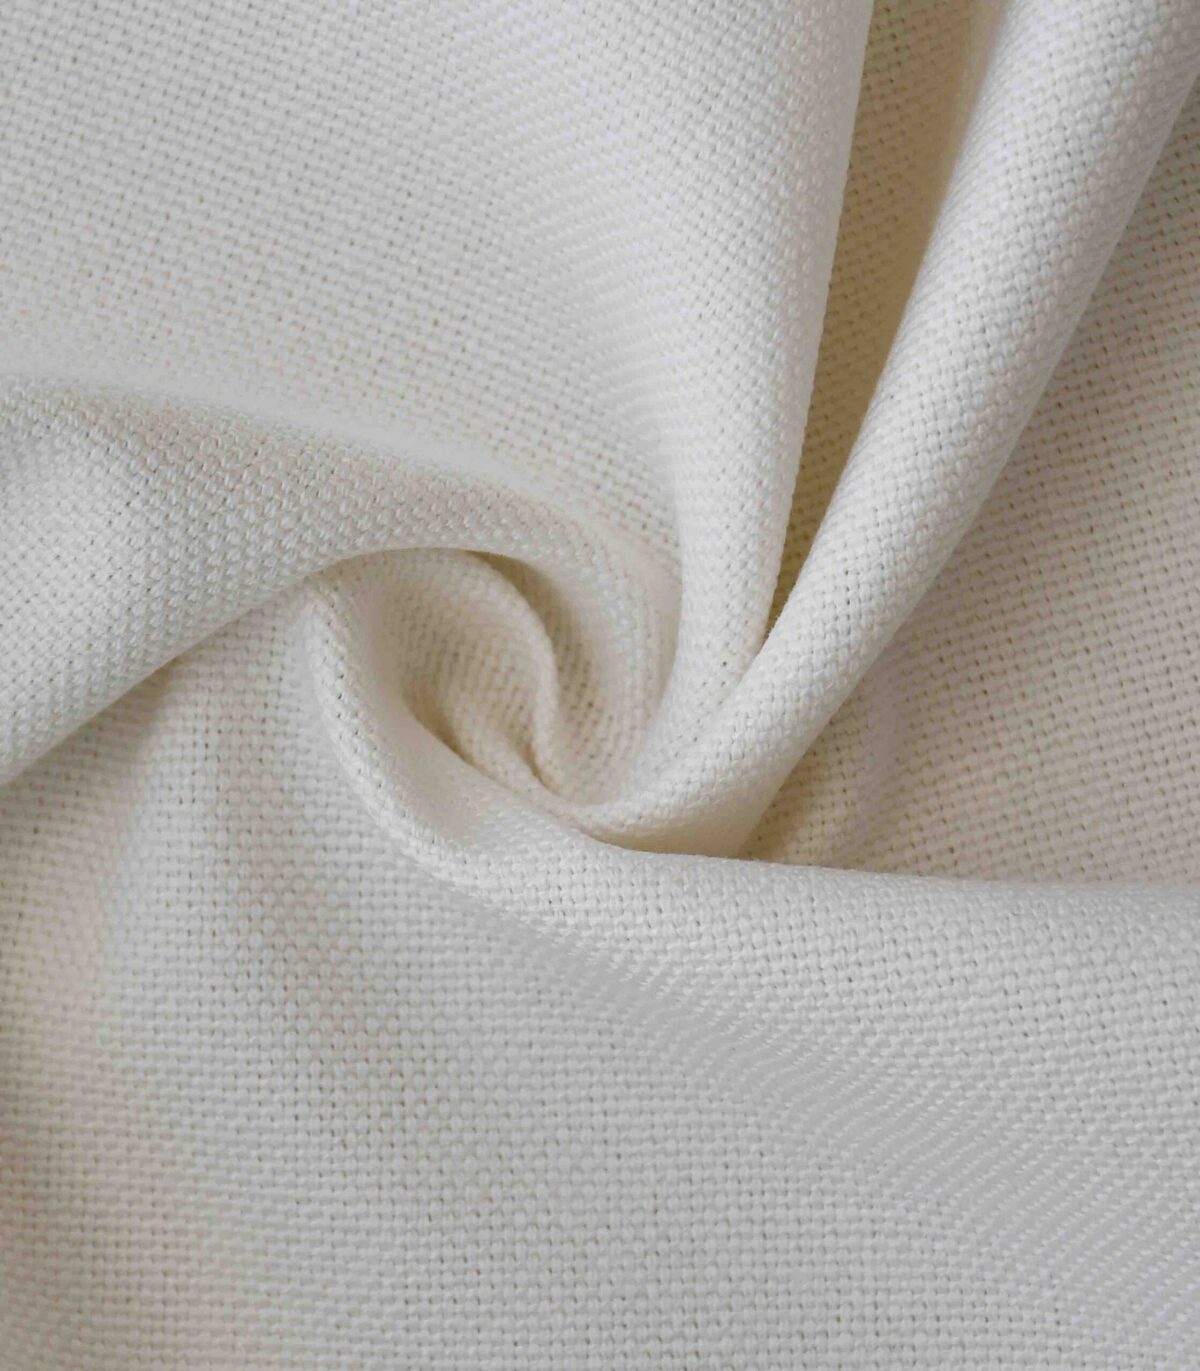 Cotton Oxford RFD Woven Fabric